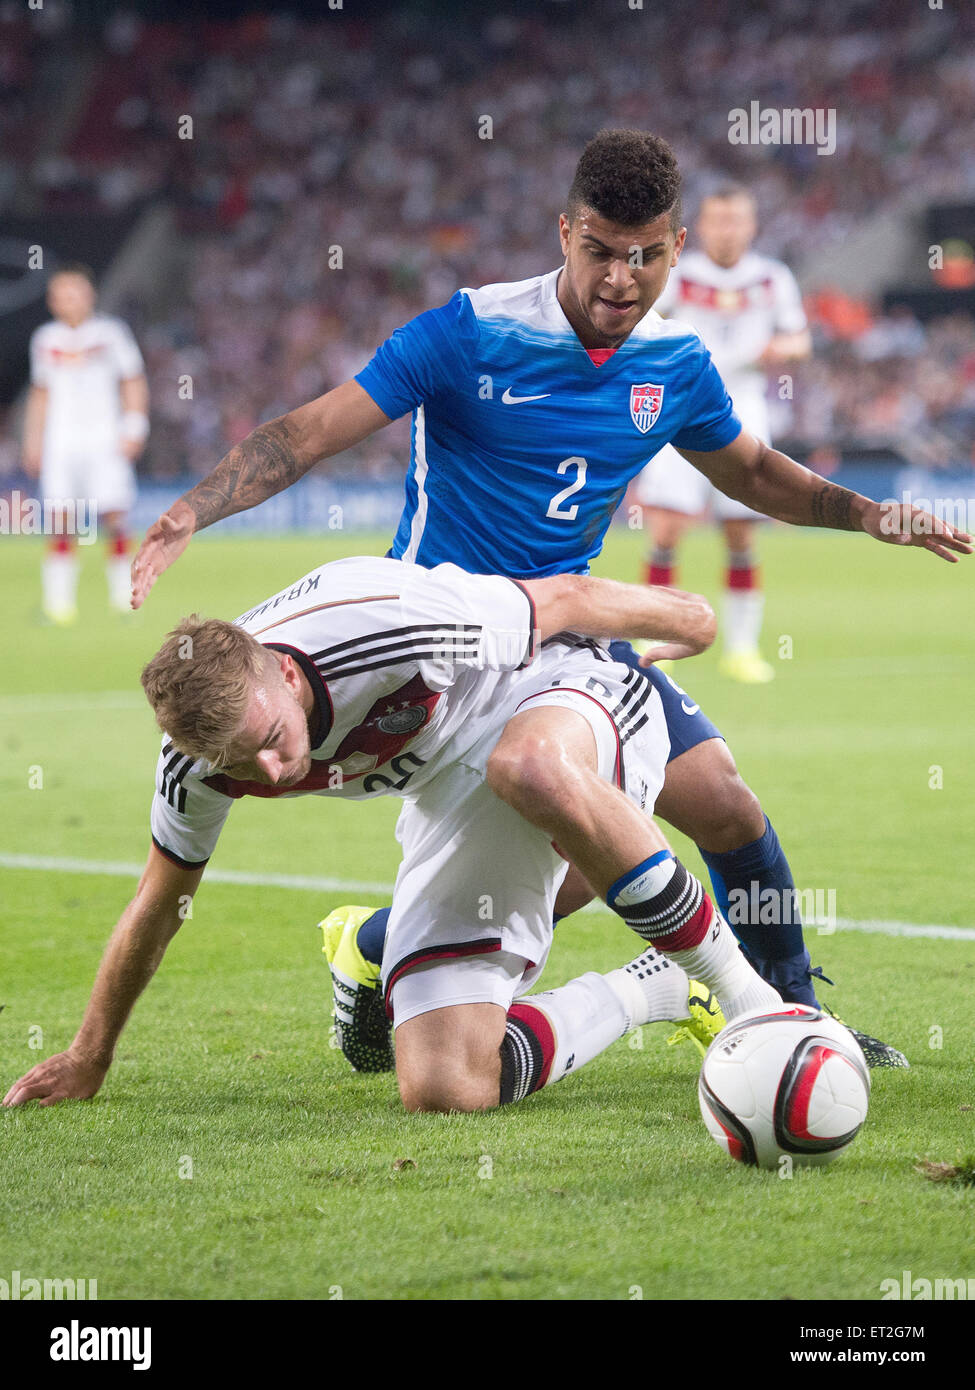 Cologne, Germany. 10th June, 2015. Germany's Christoph Kramer (BELOW) and the USA's und DeAndre Yedlin in action during the international soccer match between Germany and the USA in the RheinEnergie Stadium in Cologne, Germany, 10 June 2015. Photo: Marius Becker/dpa/Alamy Live News Stock Photo